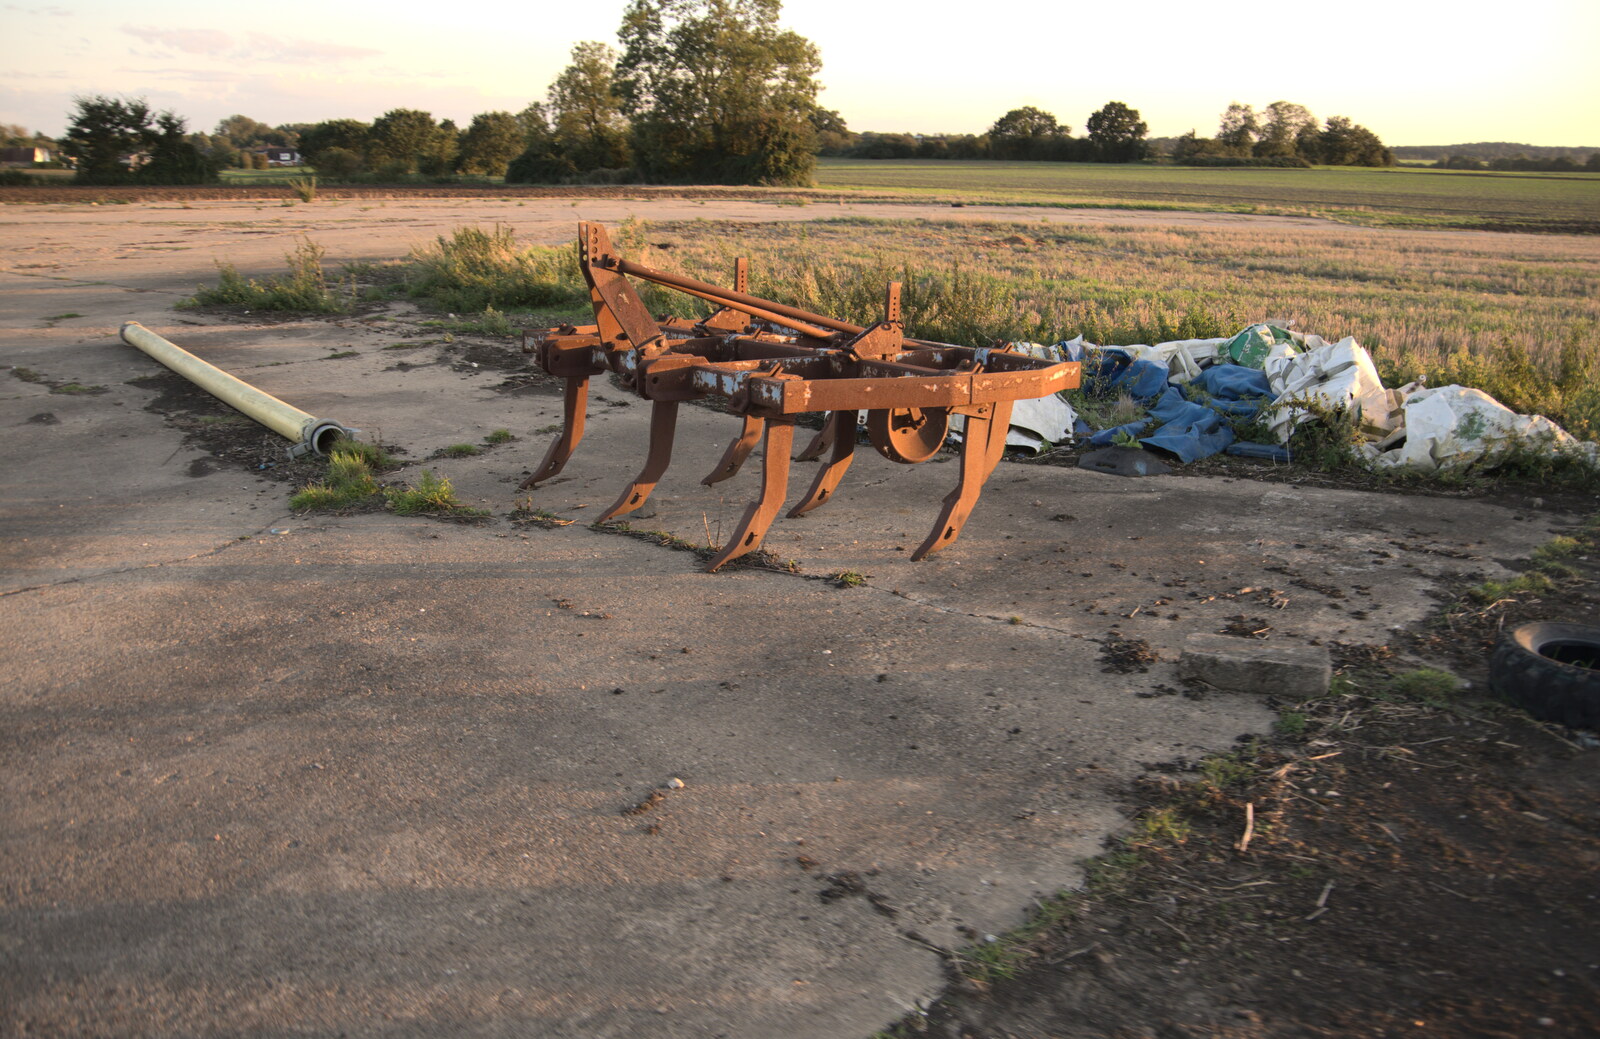 Abandoned agricultural equipment from Cycling Eye Airfield and Station 119, Eye, Suffolk - 9th September 2020